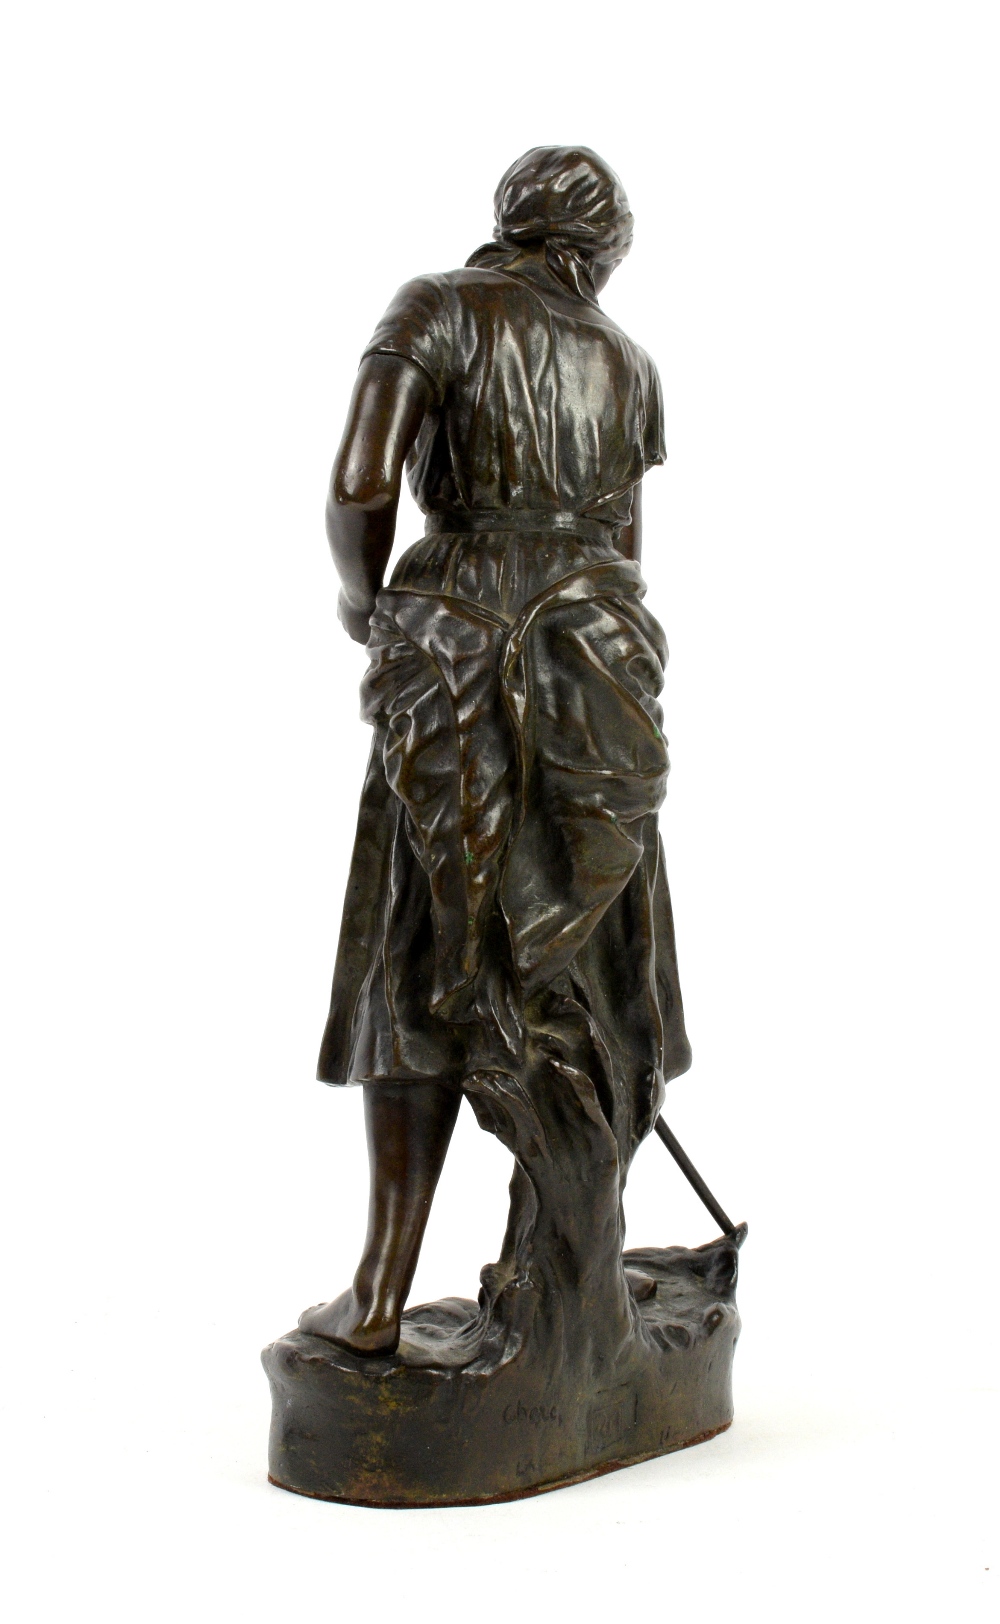 Cheze 19th century French bronze figure of a women working the land various foundry marks to base - Image 4 of 7